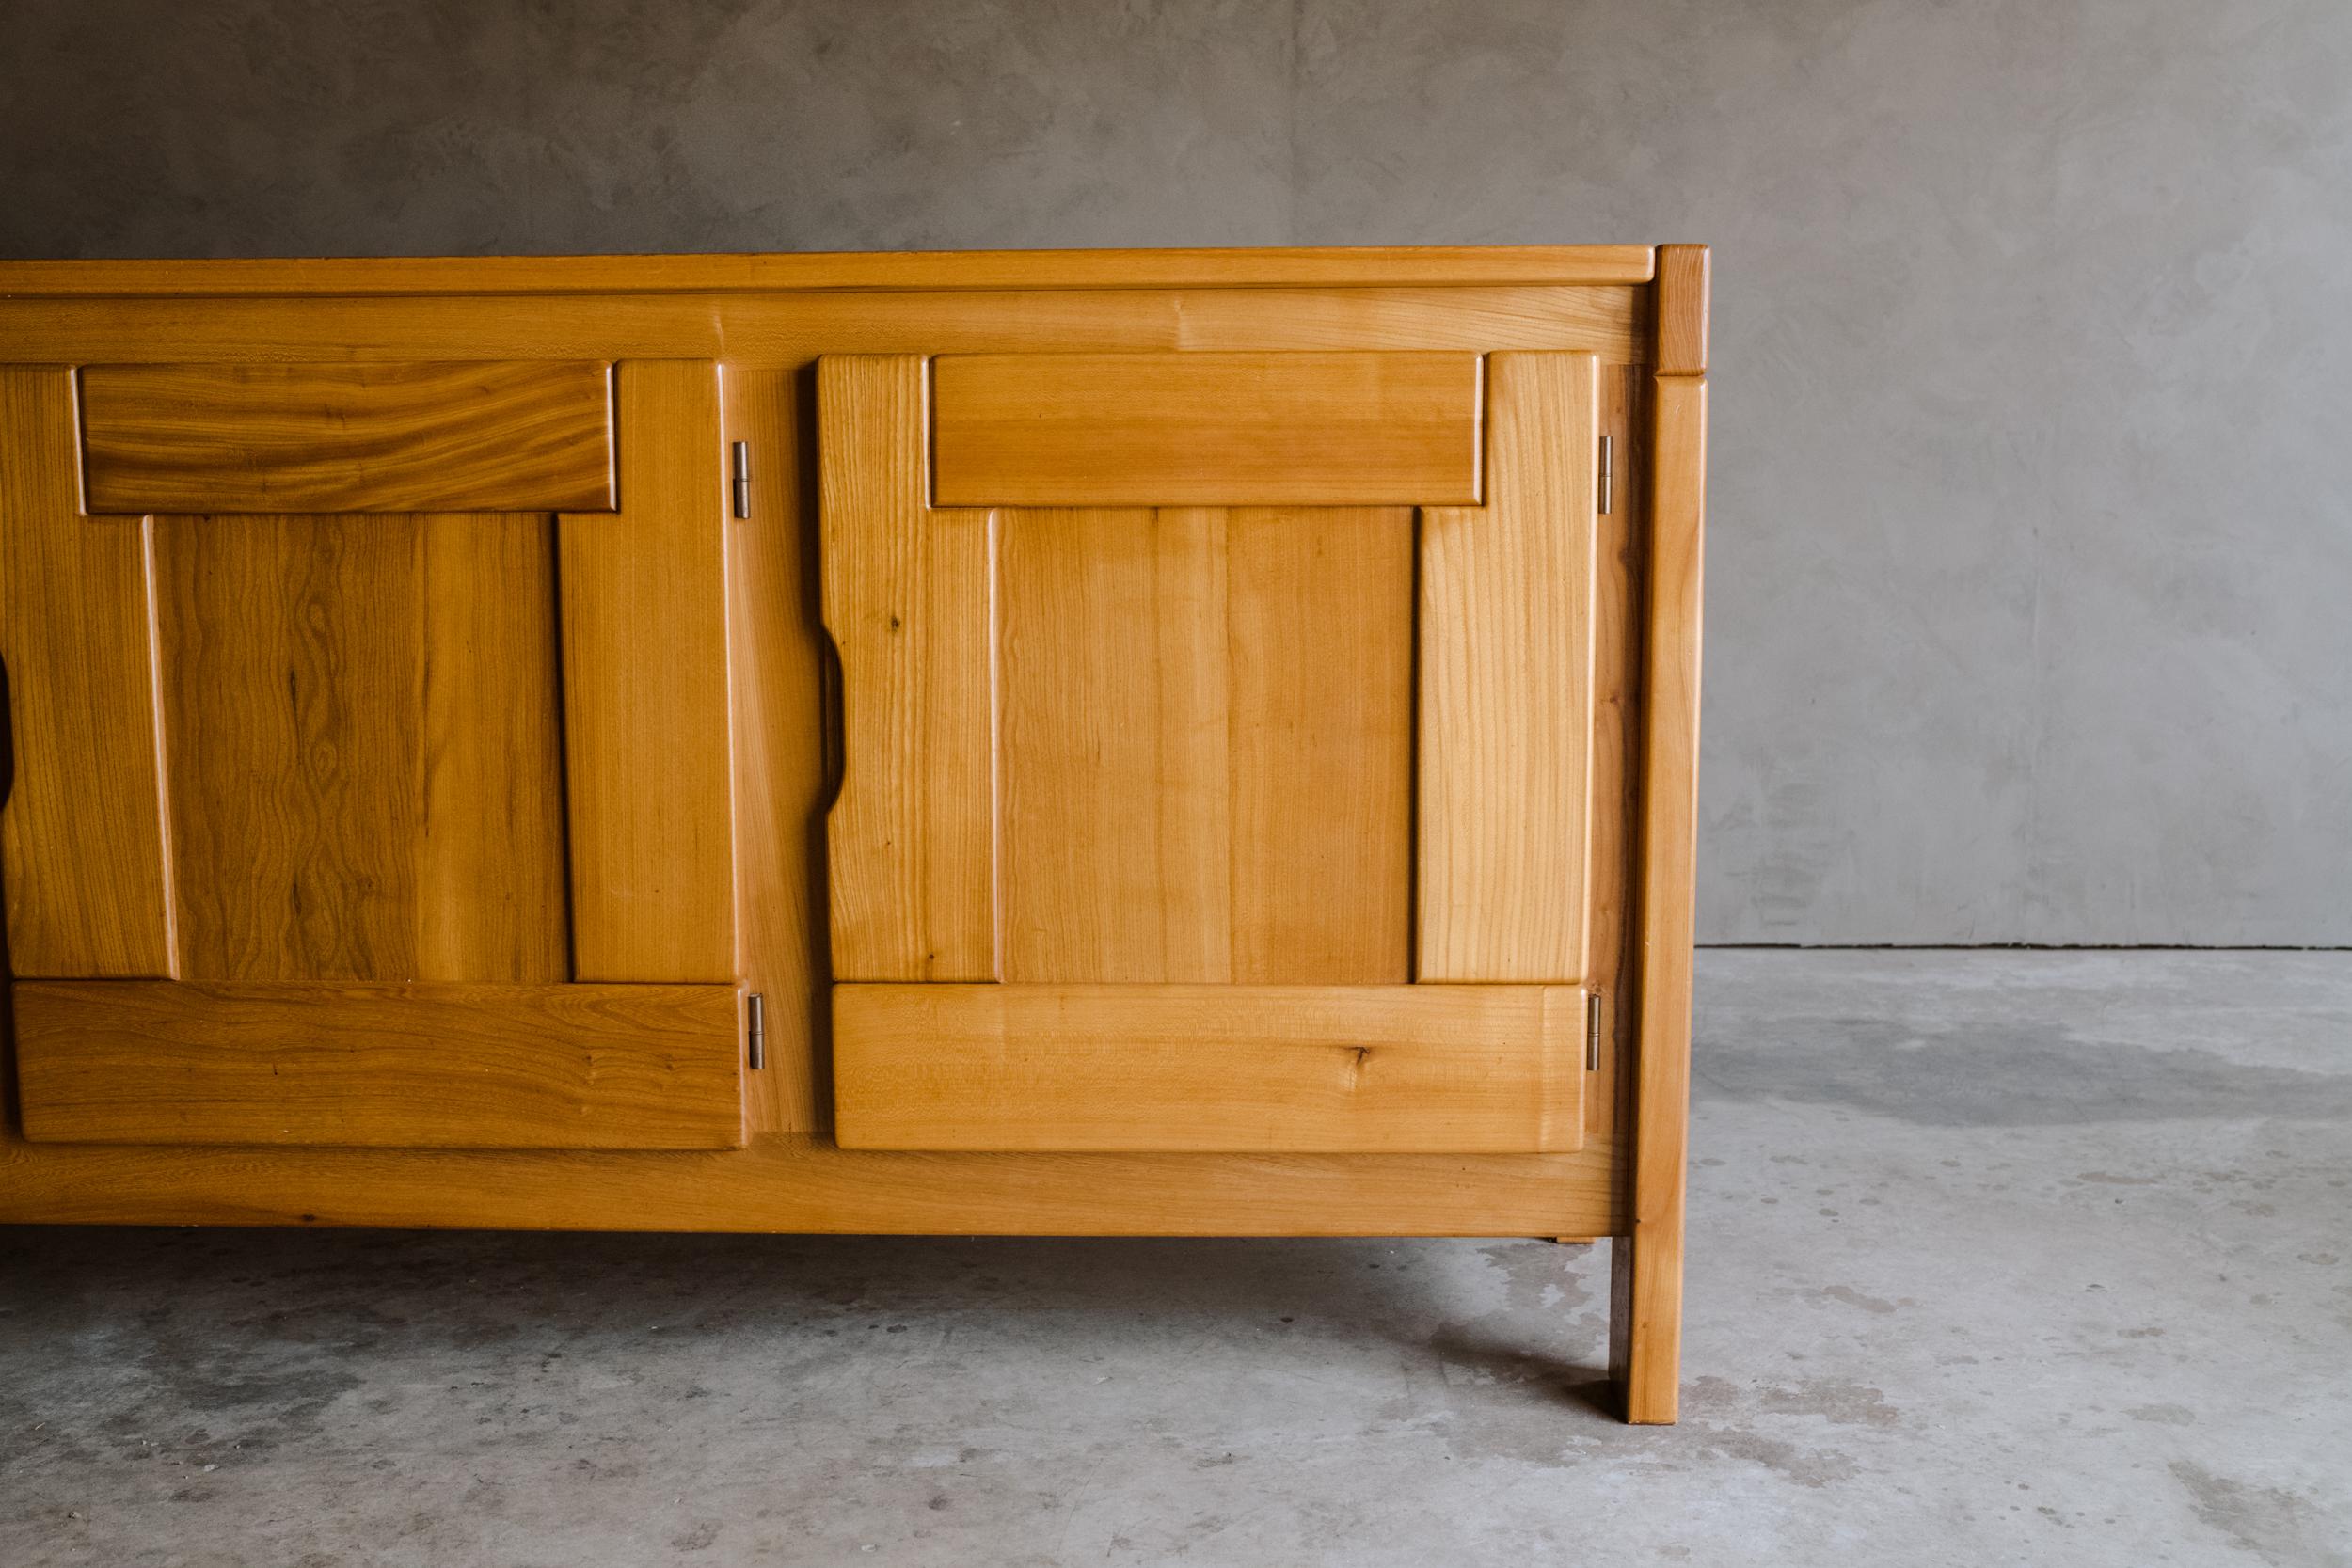 Vintage French Maison Regain sideboard from France, 1960s. Solid elm construction with light patina and wear. Fantastic quality and design.